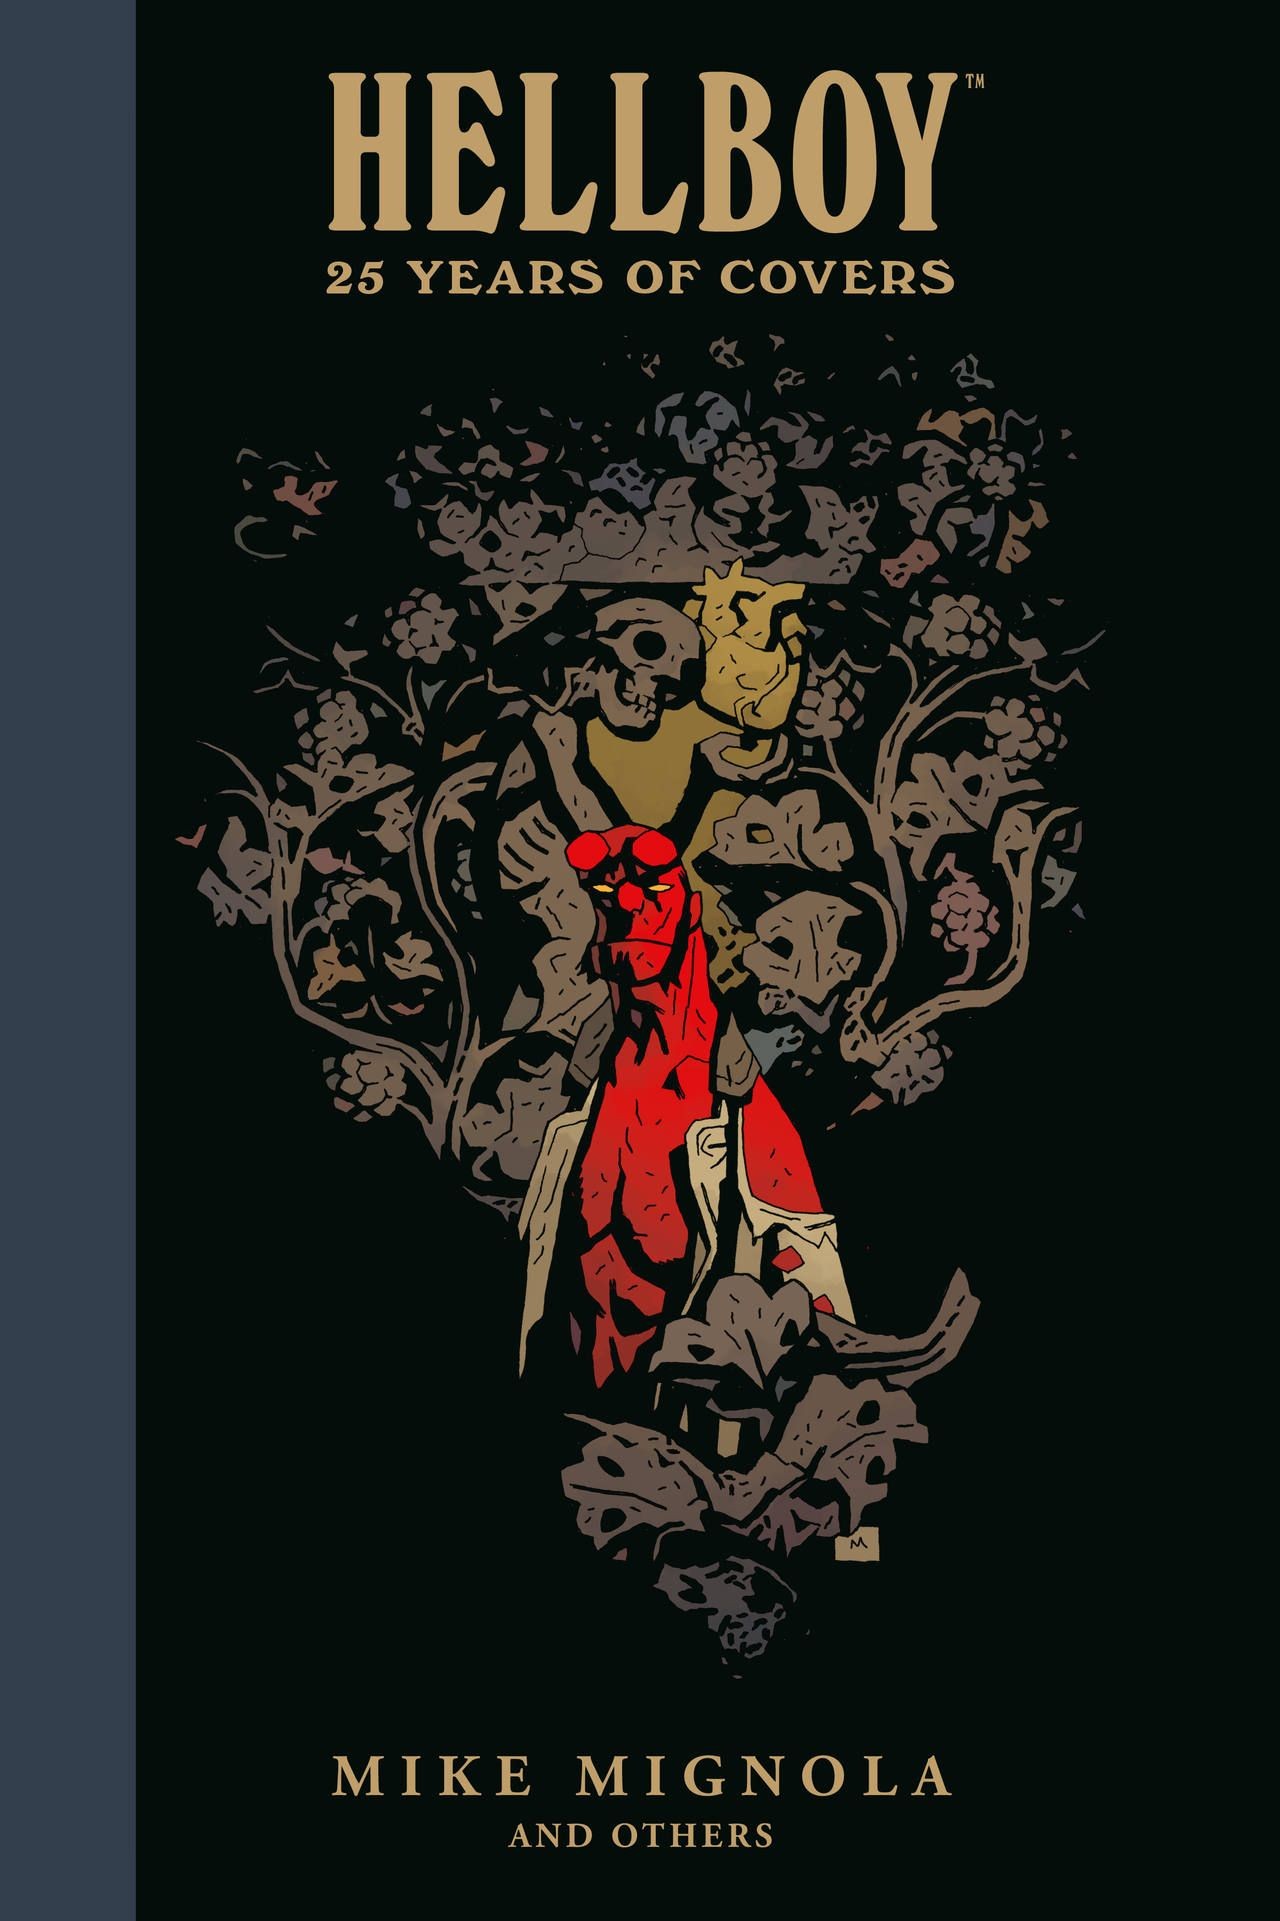 Hair [Mike Mignola] Hellboy - 25 Years Of Covers (2019) Bound